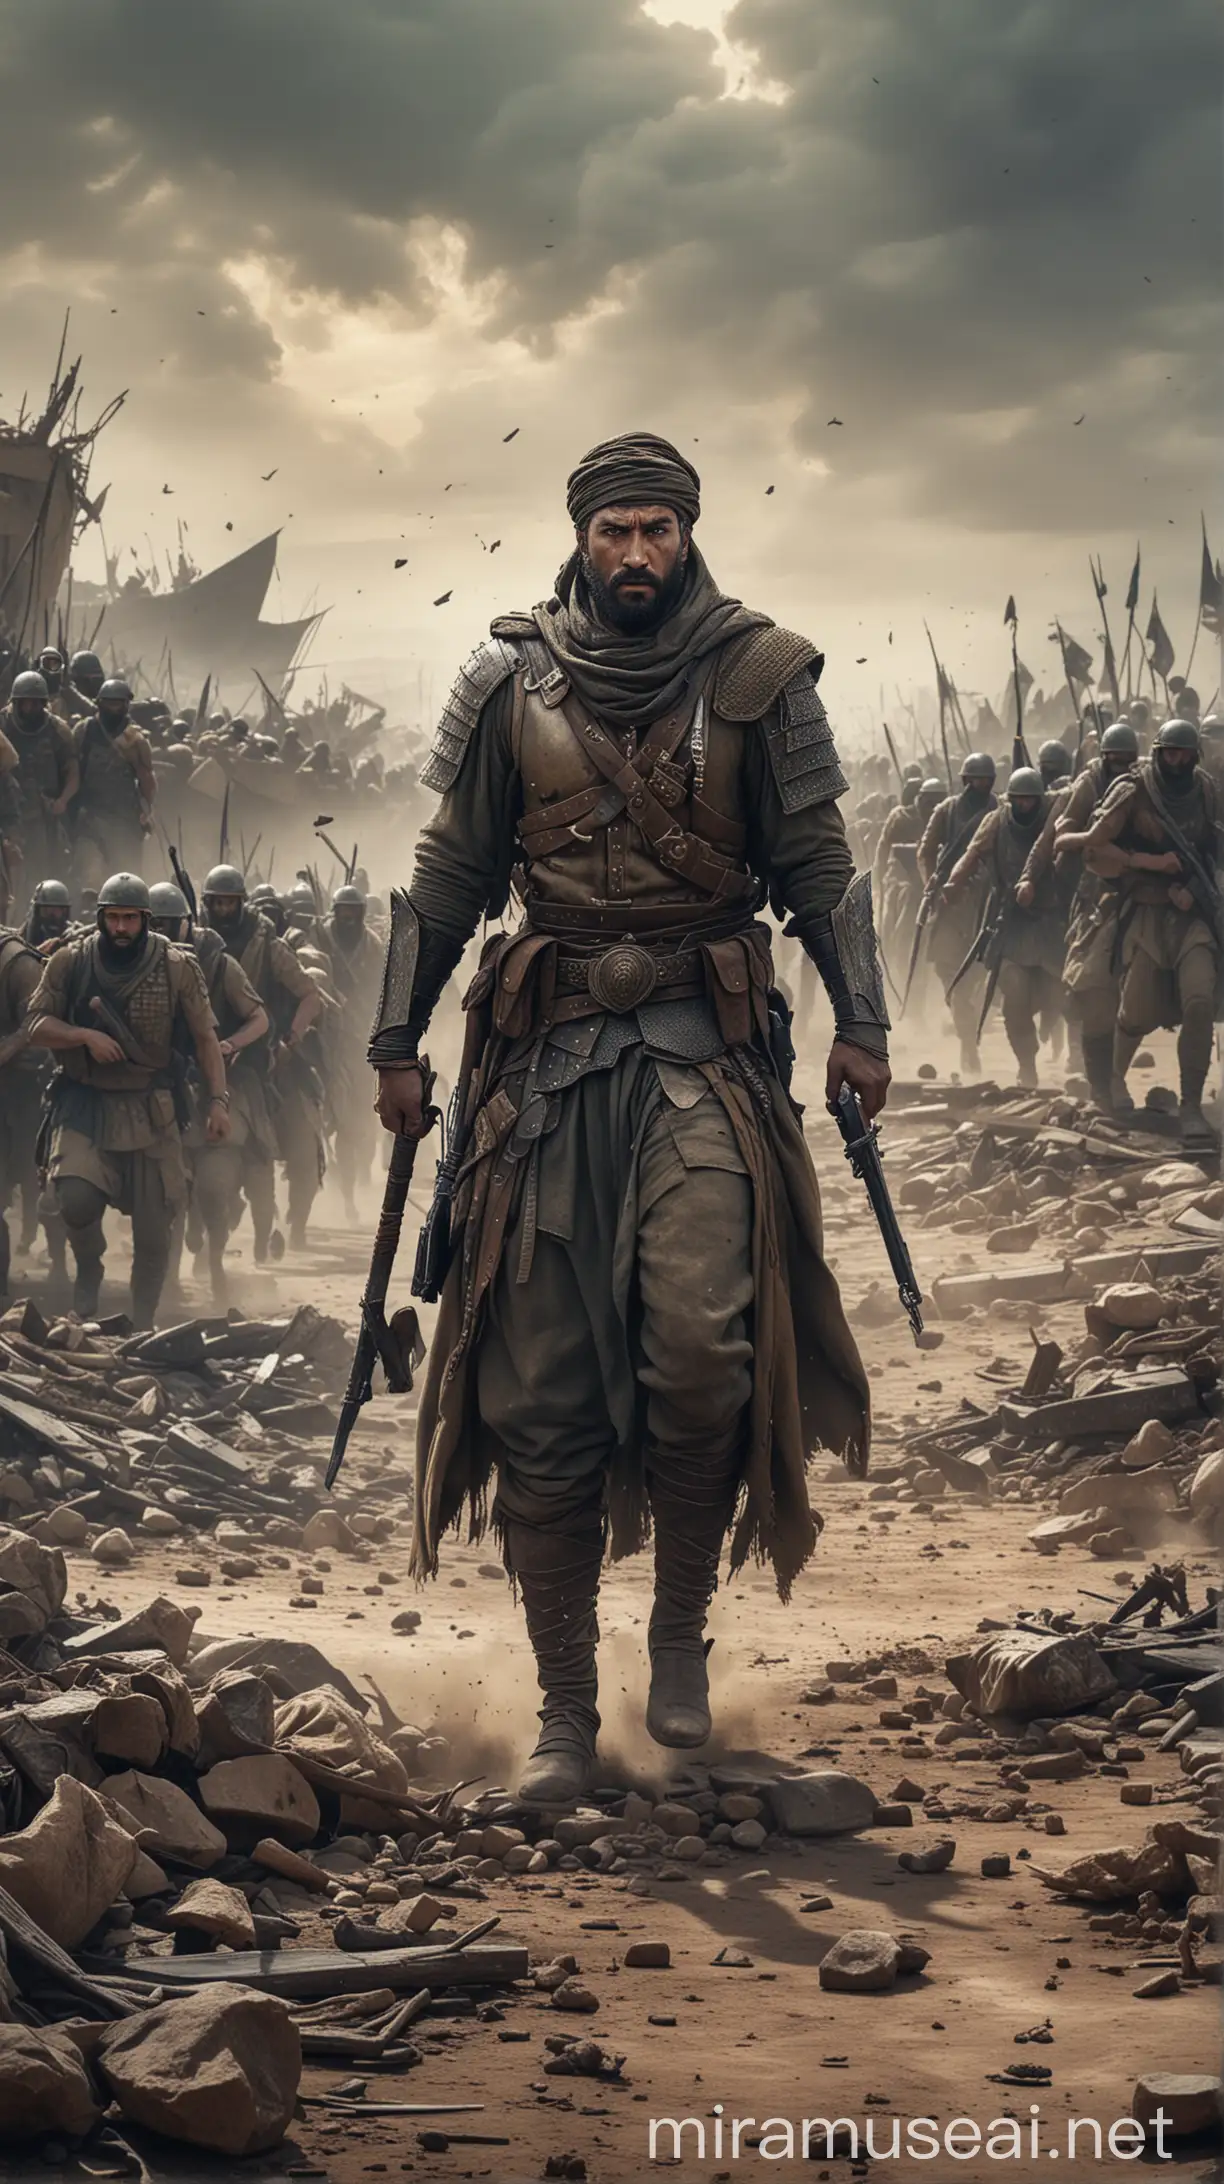 Generate an image of a lone warrior, Shammah, standing resolutely amidst chaos, with soldiers fleeing in the background.